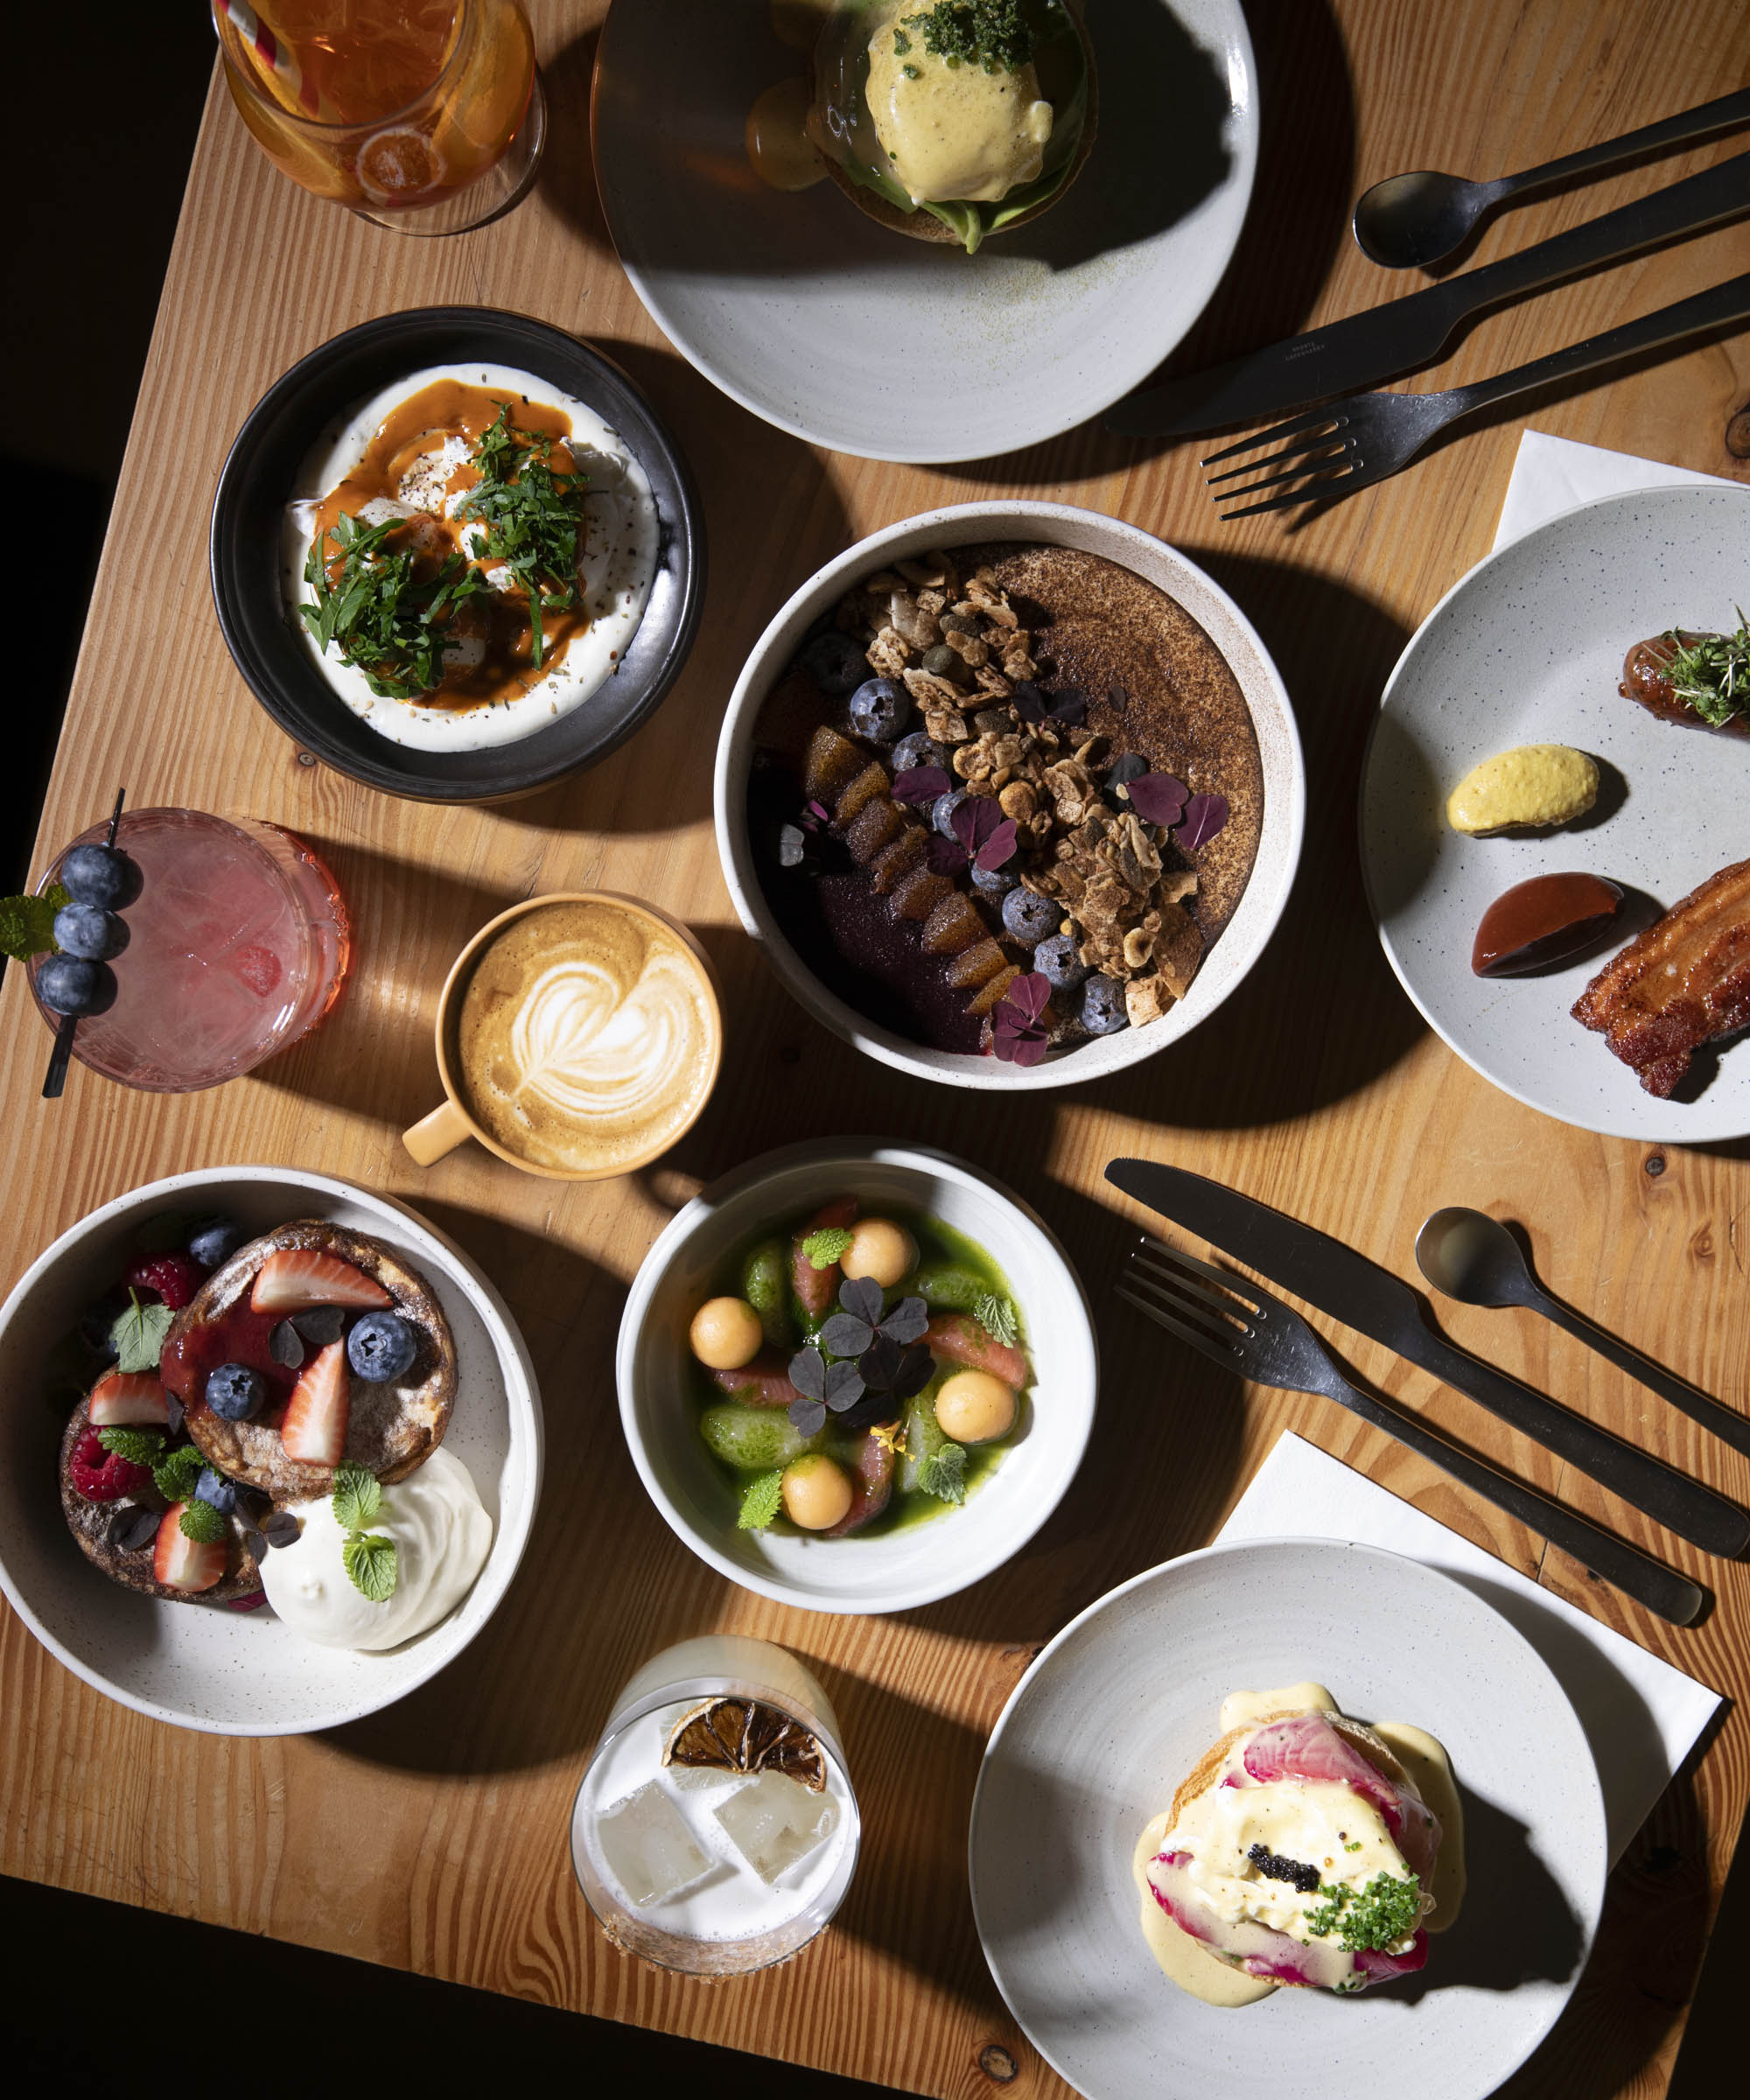 Pick whatever you like for brunch at Venner – Two former Kadeau chefs are creating a buzz with this must-try brunch spot in City Center